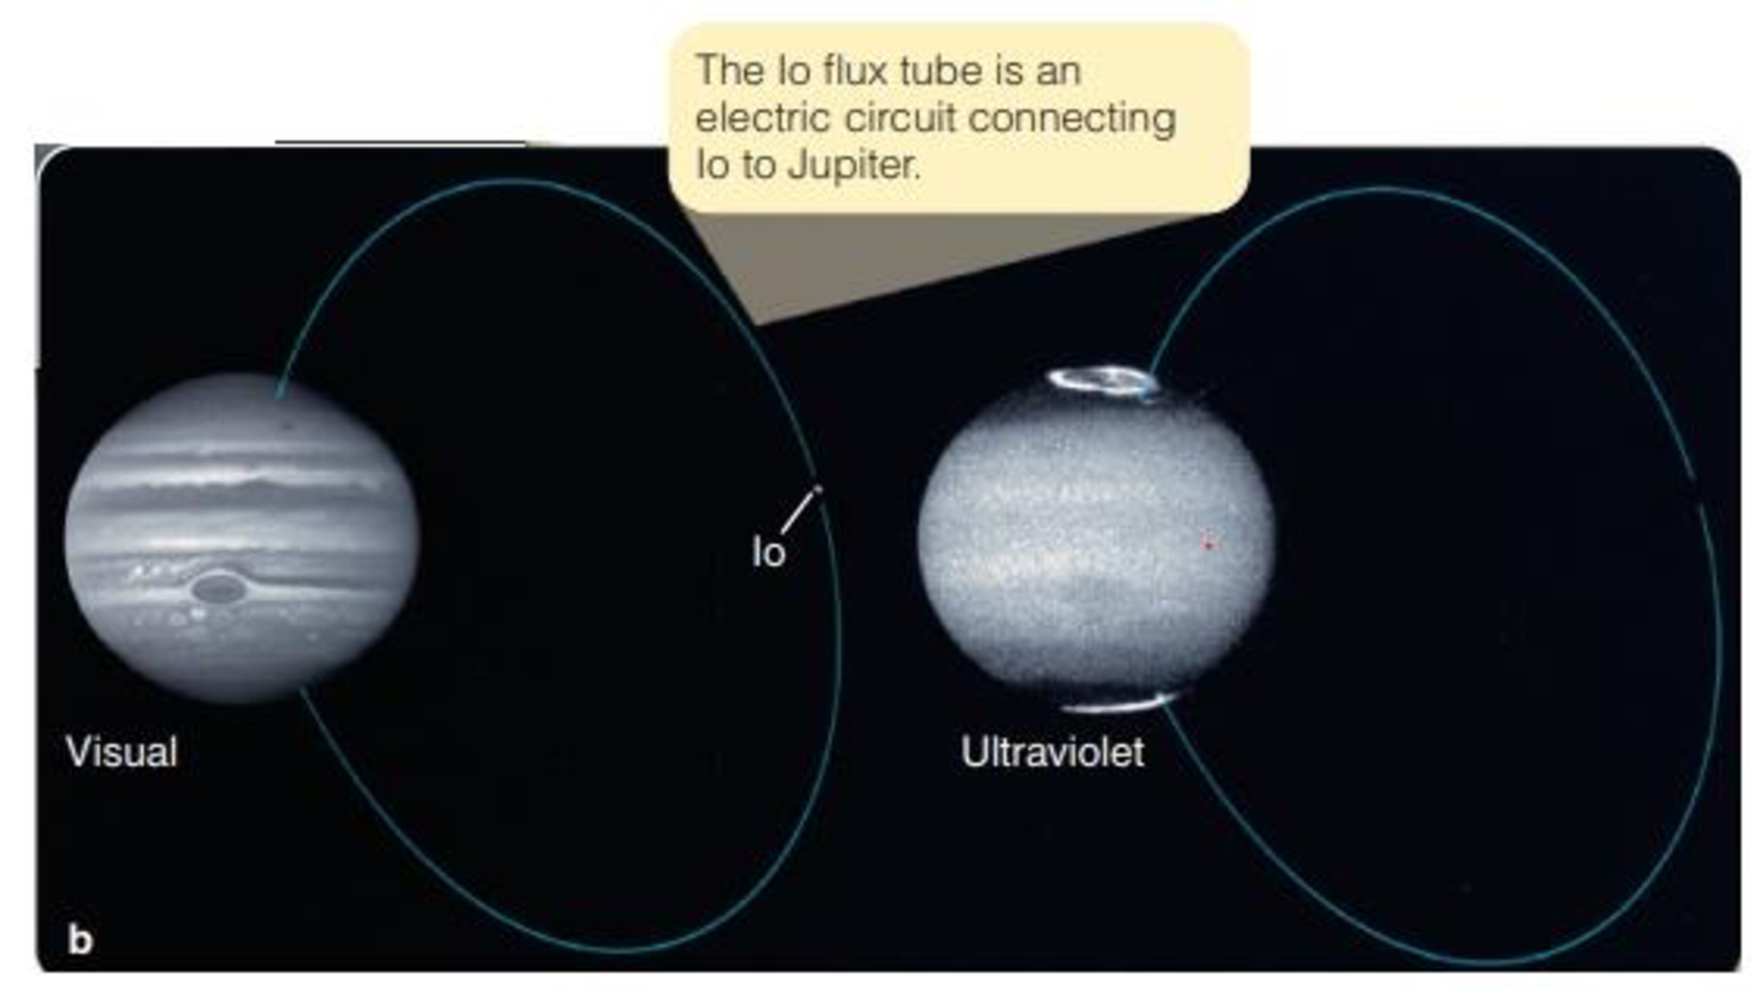 Chapter 22, Problem 1LTL, Look at Figure 22-4b. Compare the visual and UV images of Jupiter. What do you notice? What does it 